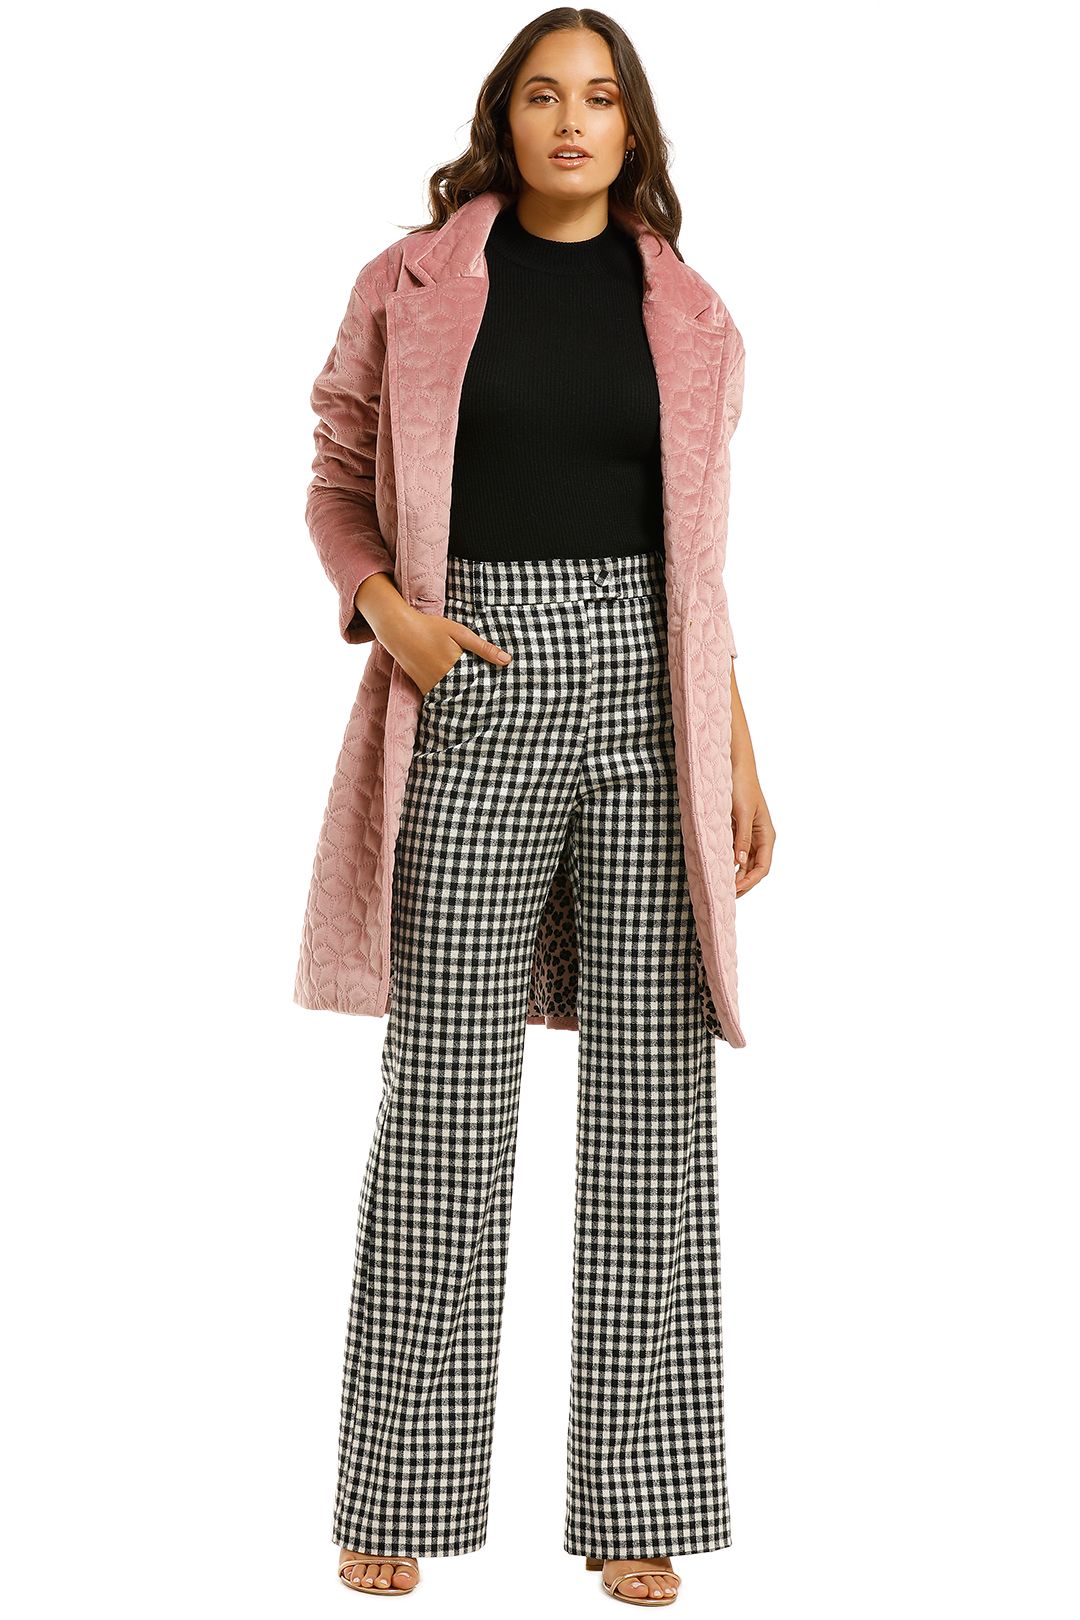 Curate-by-Trelise-Cooper-Little-Quality-Coat-Pink-Front